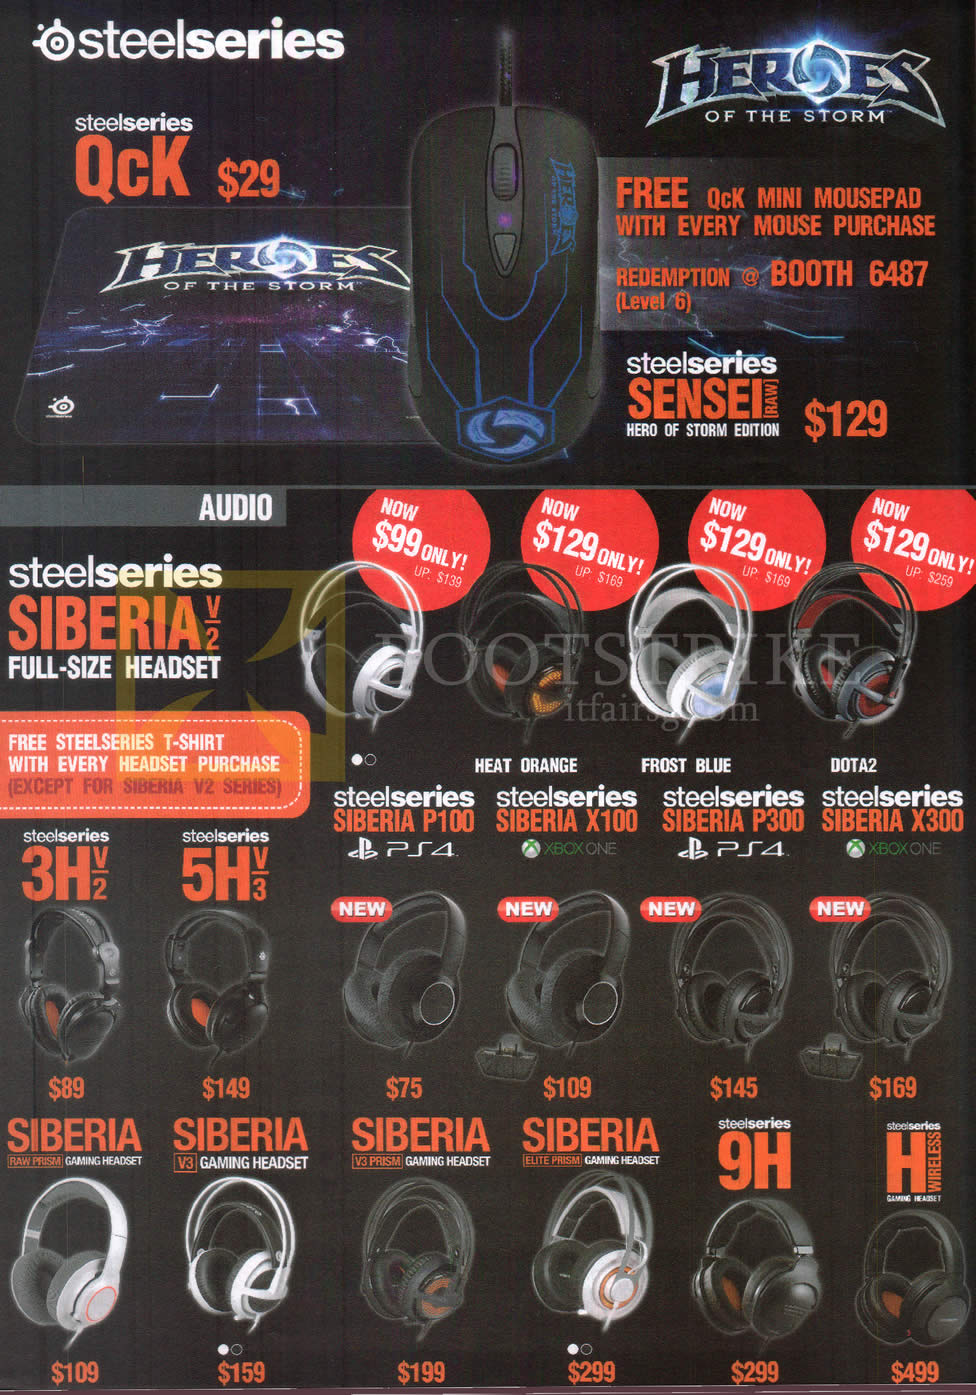 COMEX 2015 price list image brochure of Steelseries Mouse QcK, Headsets Siberia P100, X100, P300, X300 3HV2, 5HV3, 9H, H Wireless